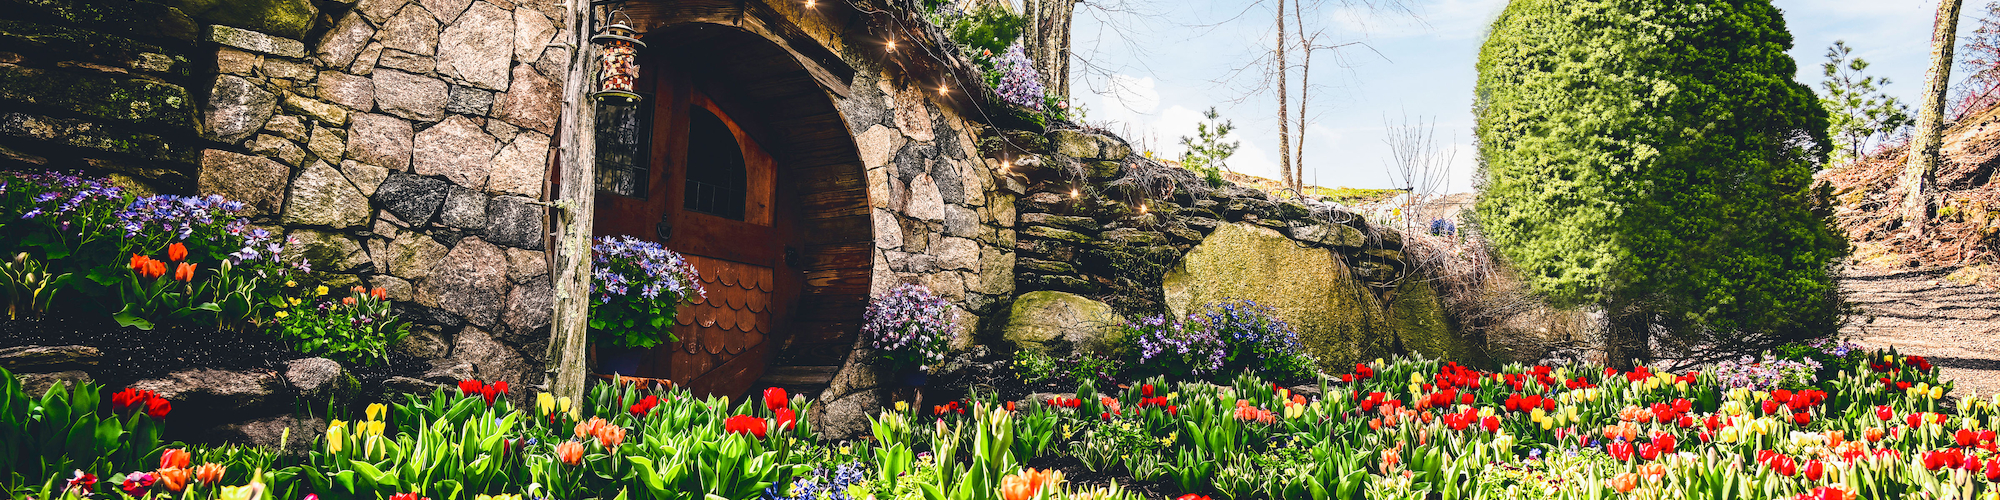 Step into the enchanting Hobbit House Photo Experience™ at The Preserve, surrounded by a springtime bloom of tulips and florals.